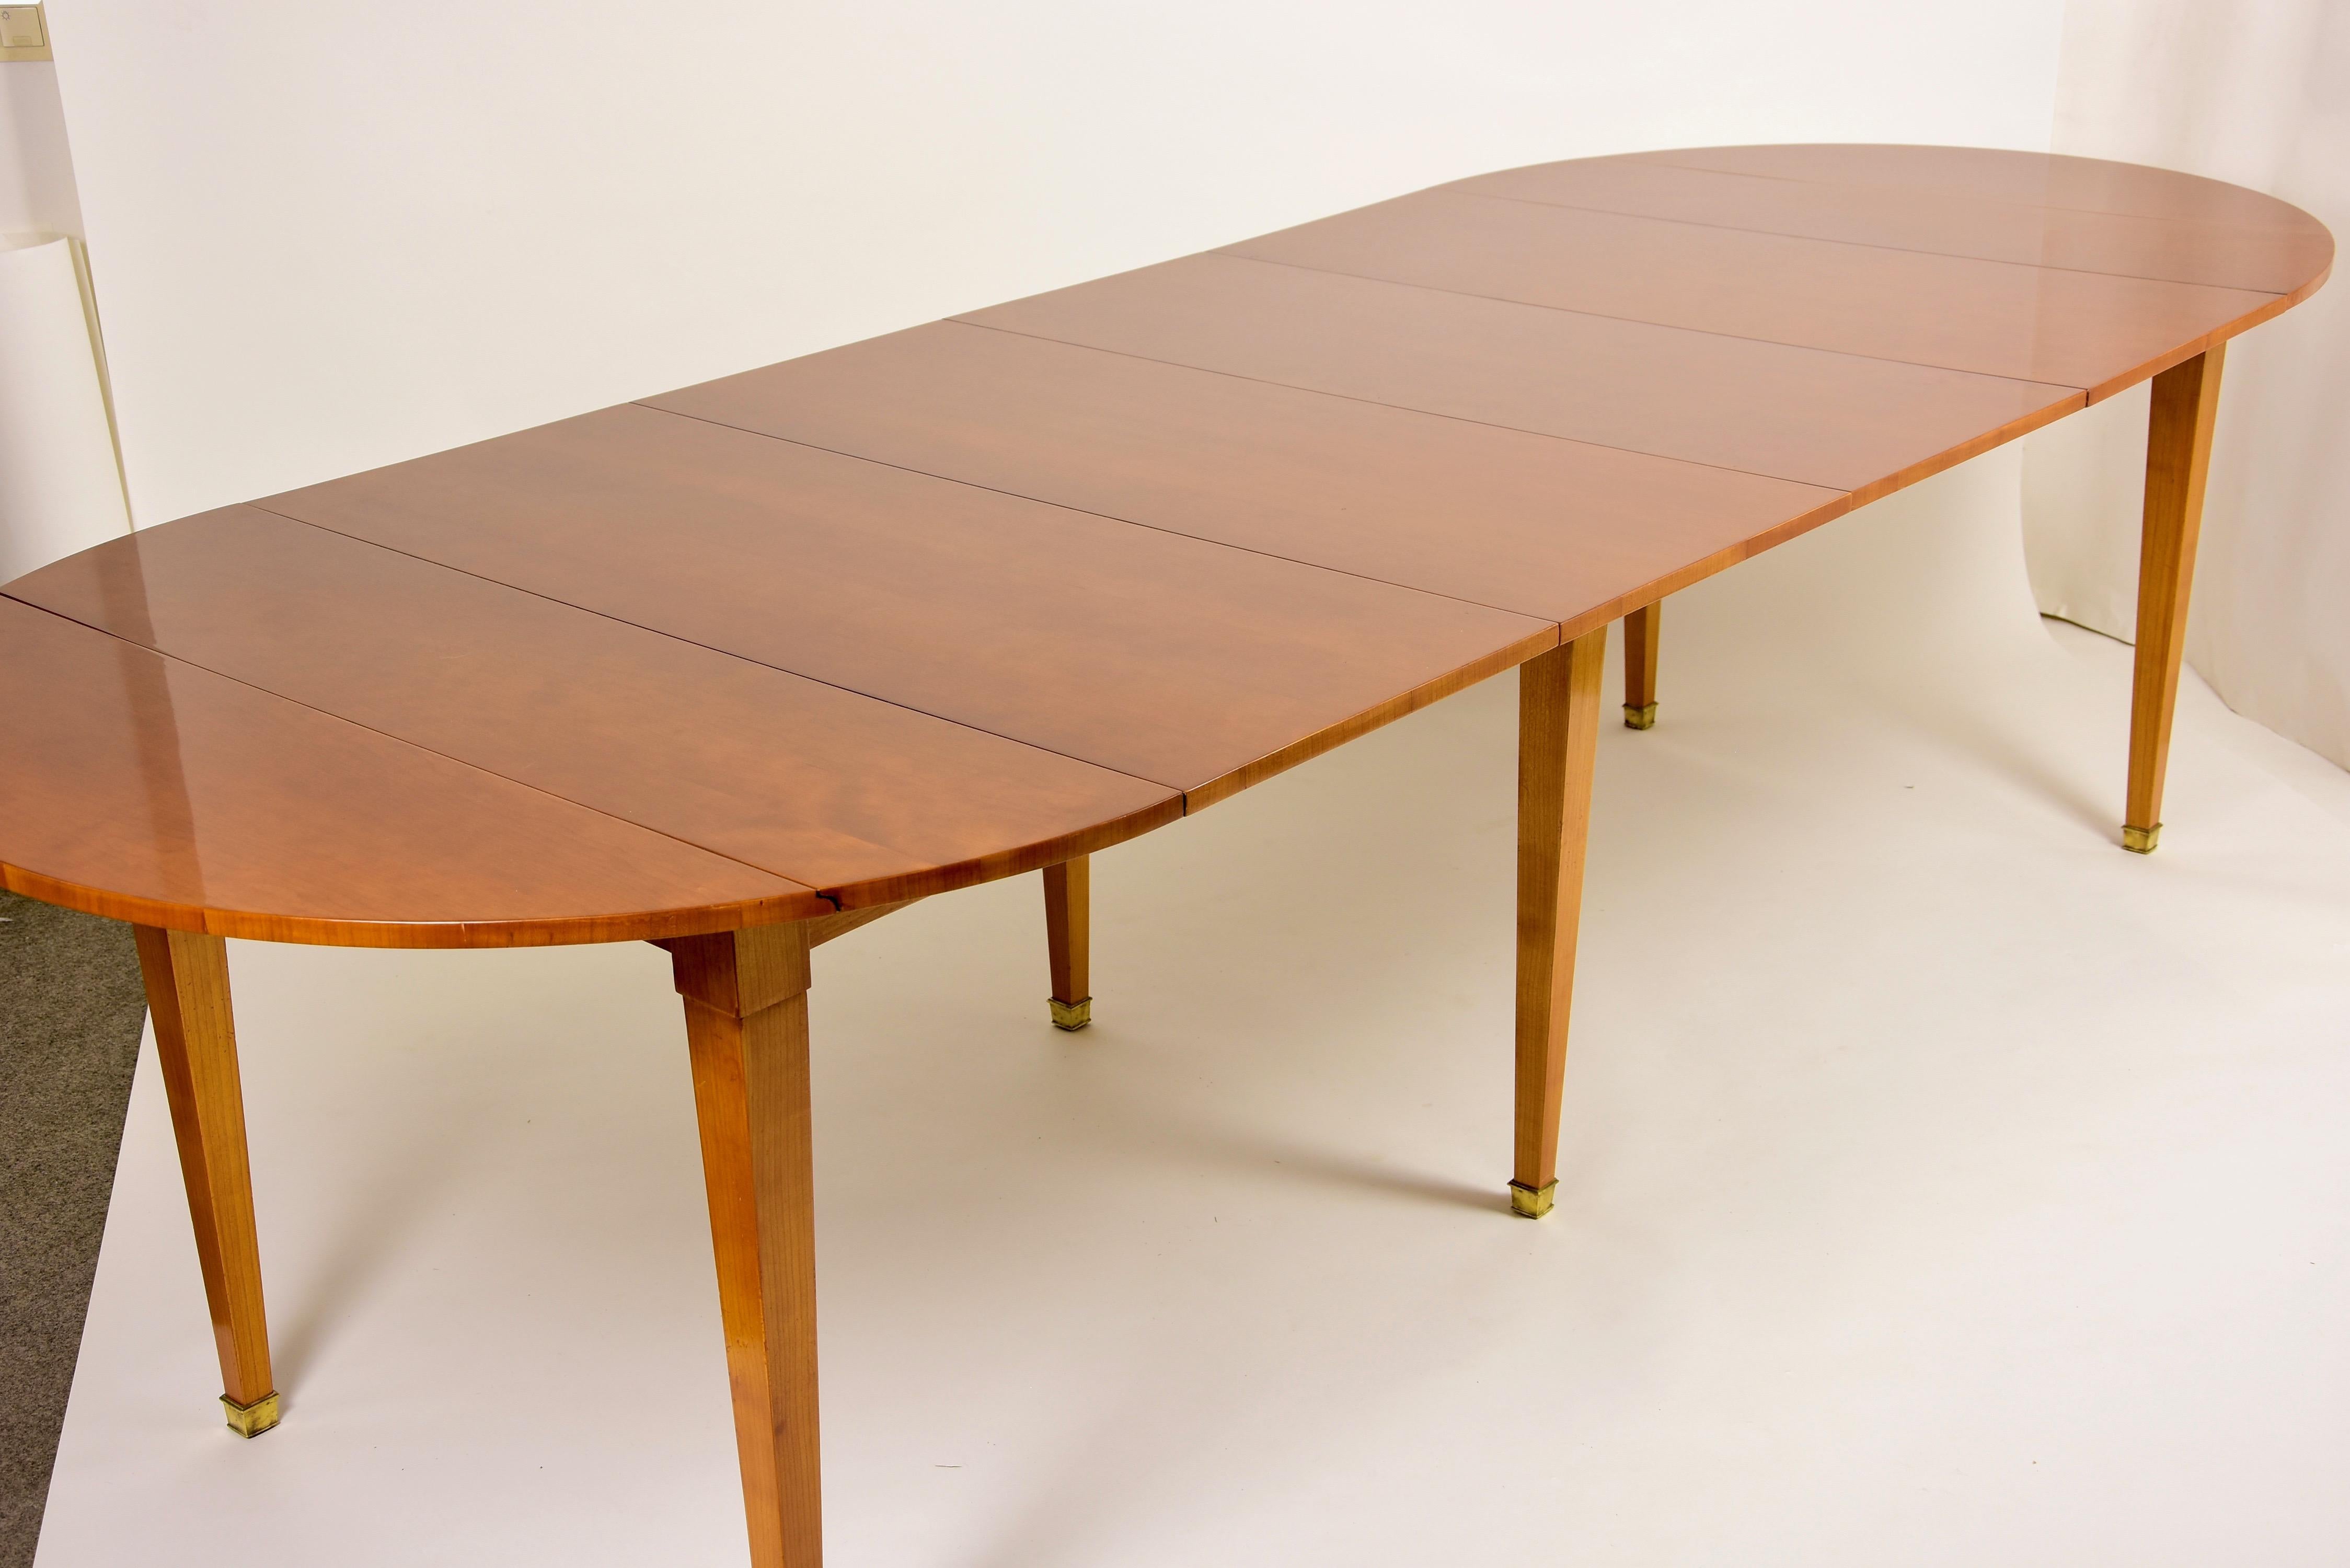 Biedermeier extending table cherry wood with 4 additional plates
on six conical legs
Diameter 115 cm height 78 cm
two wings hinged then 70 cm deep 115 cm wide
pulled out to 295 cm
A table for up to 12 people
Highly polished water and alcohol